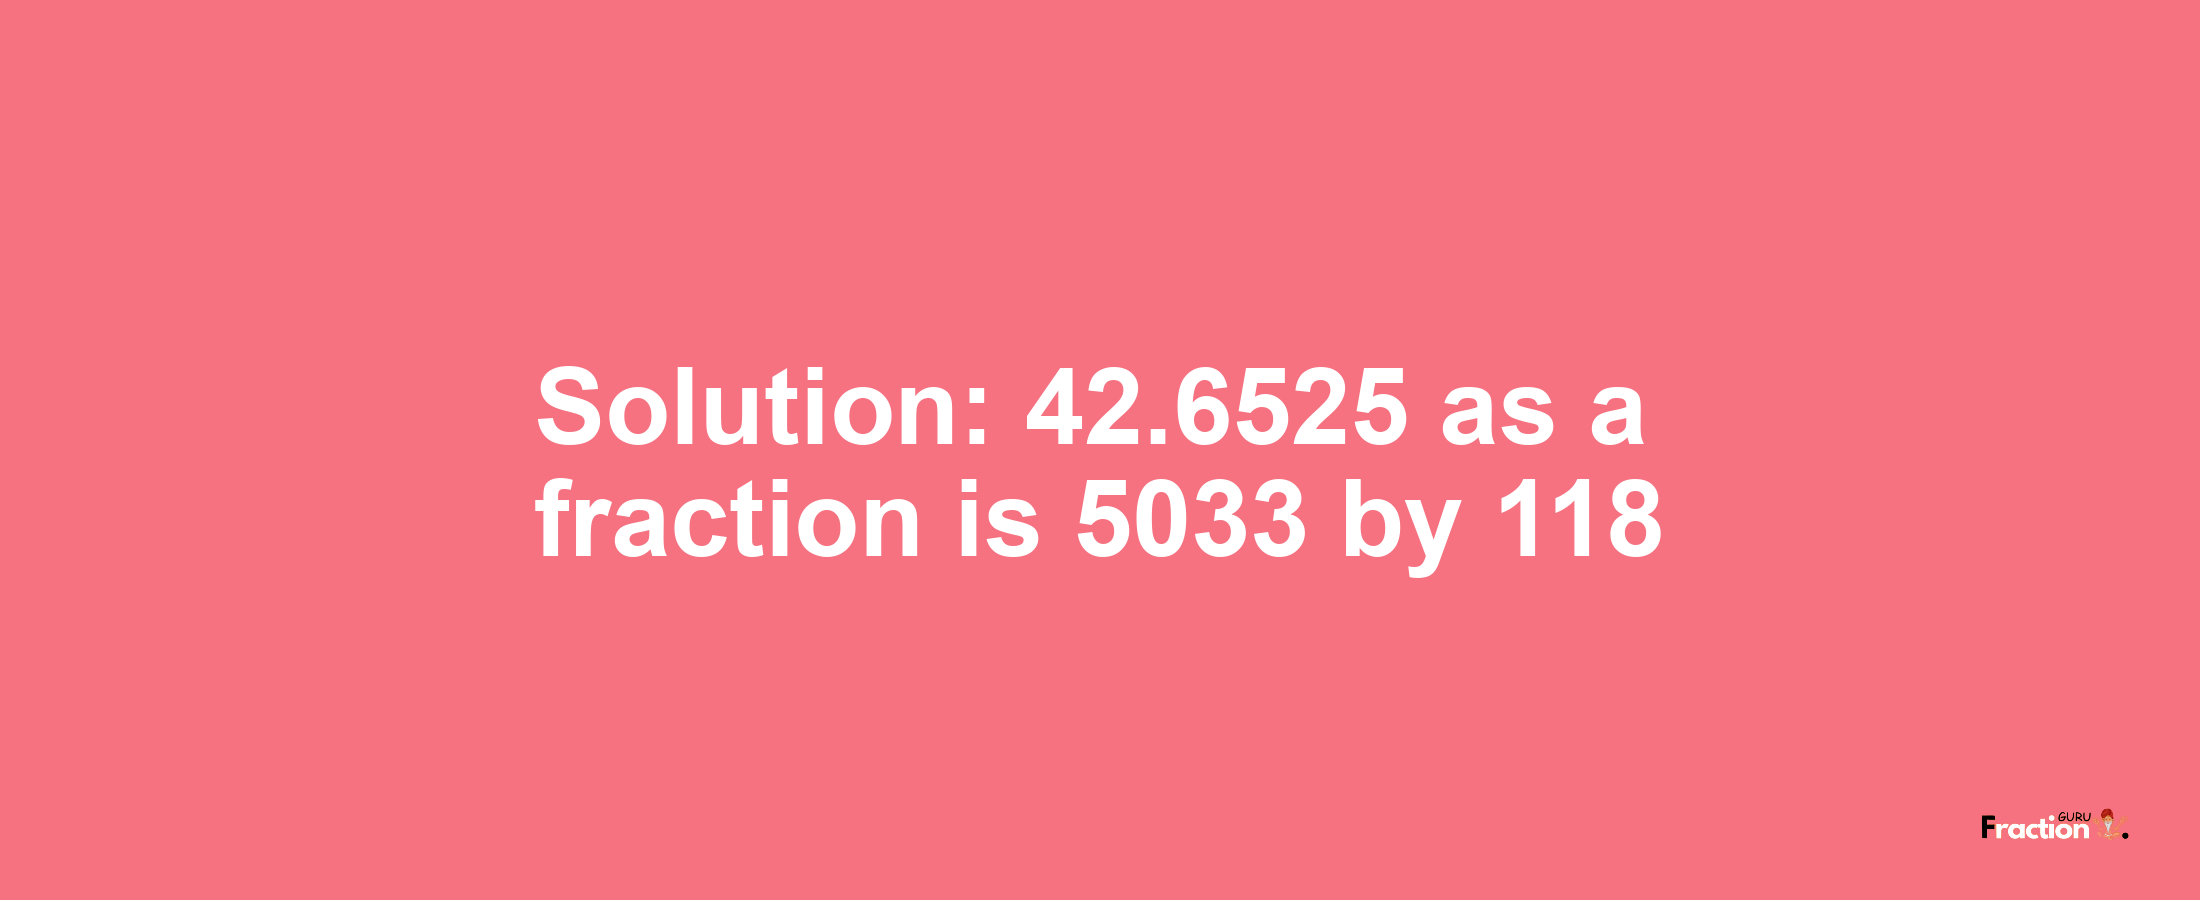 Solution:42.6525 as a fraction is 5033/118